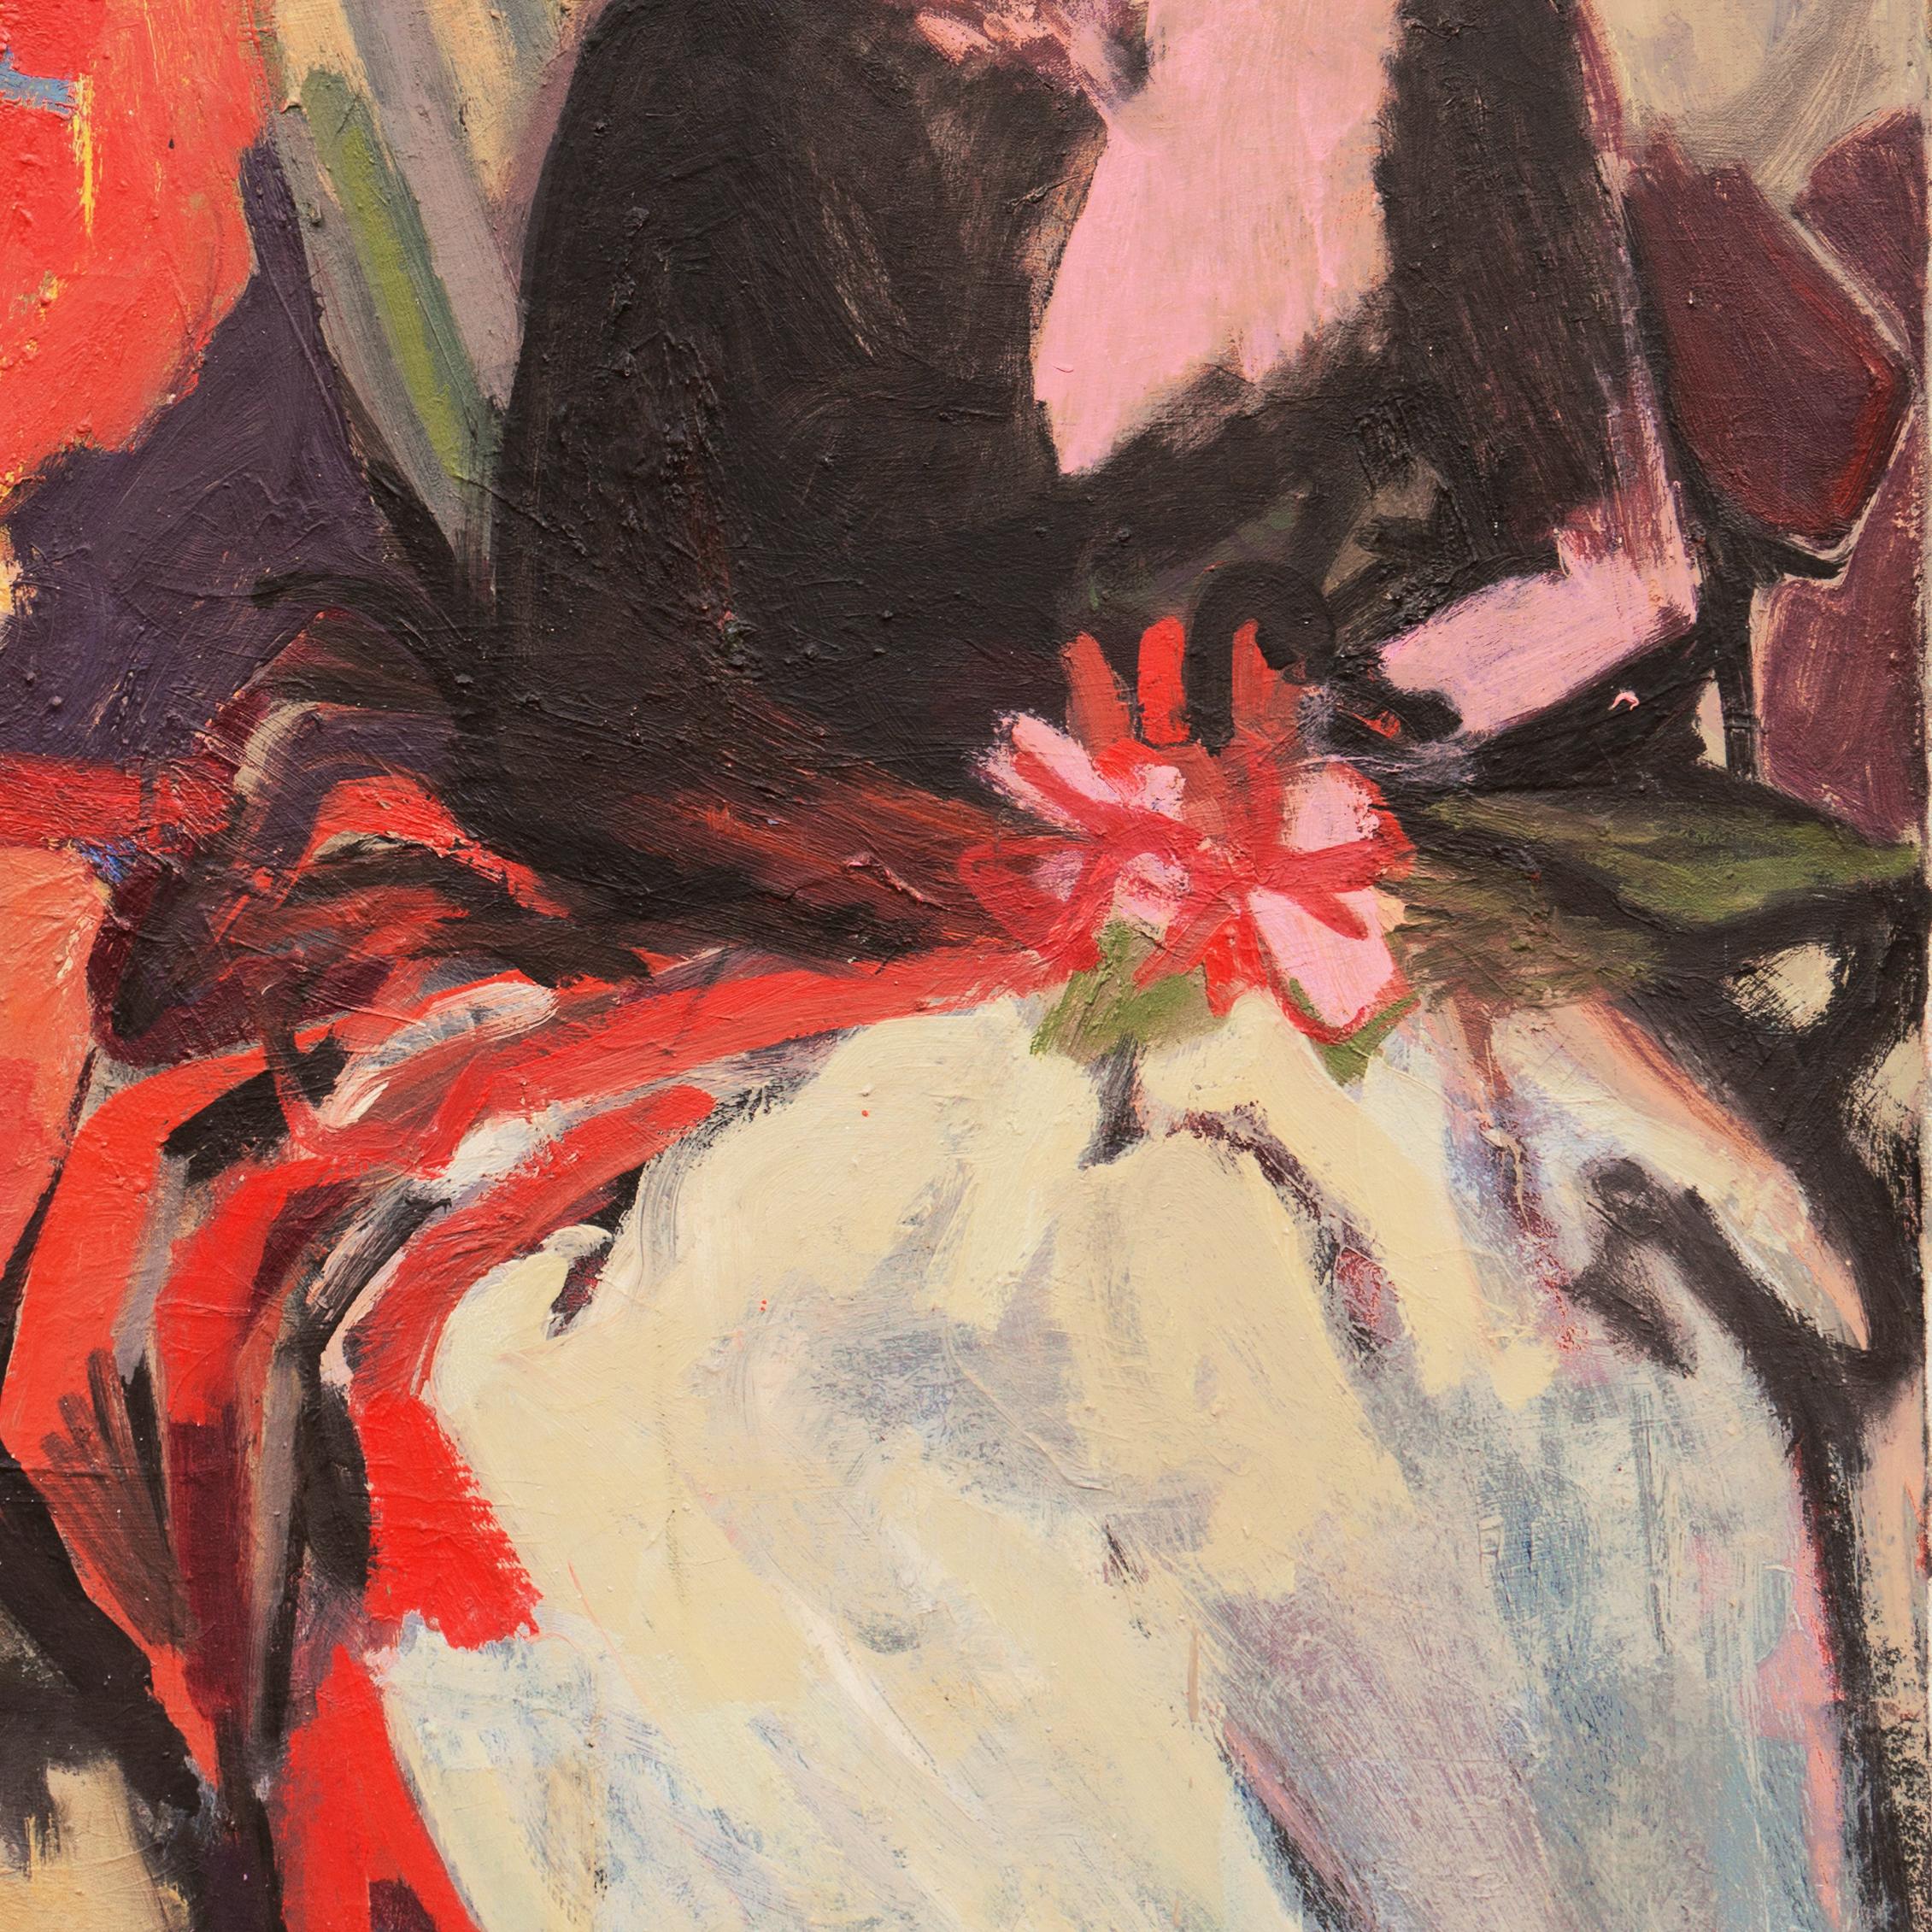 A substantial oil painting of two women shown adjacent and seated and painted in bravura Expressionist style with a subtle and complex palette by an intuitive, bravura hand. 

Signed lower right, 'B. Curtice Hitchock' for Beverly Curtice Hitchcock